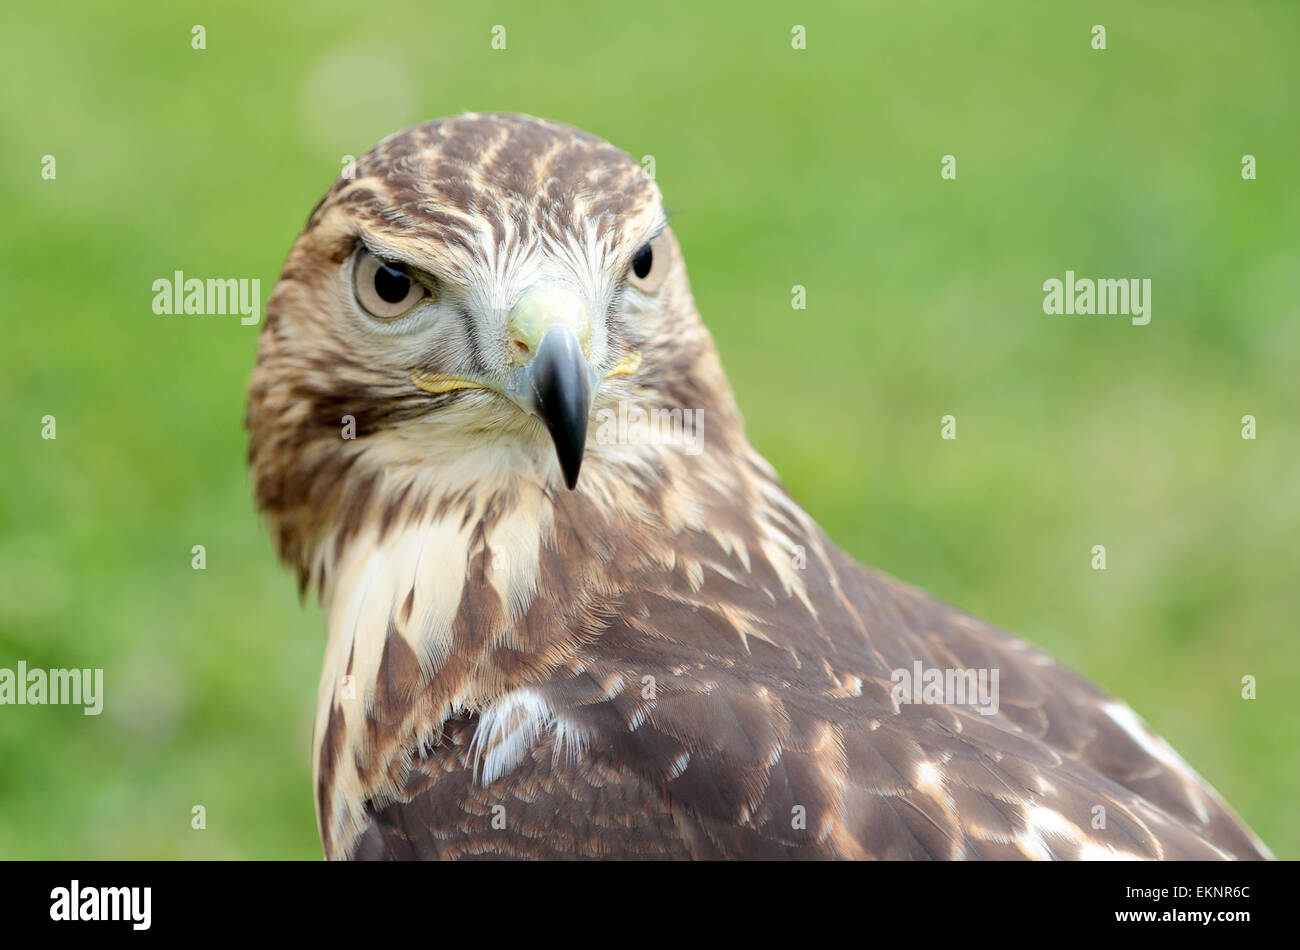 Portrait of a red-tailed hawk, Buteo jamaicensis, looking at camera Stock Photo